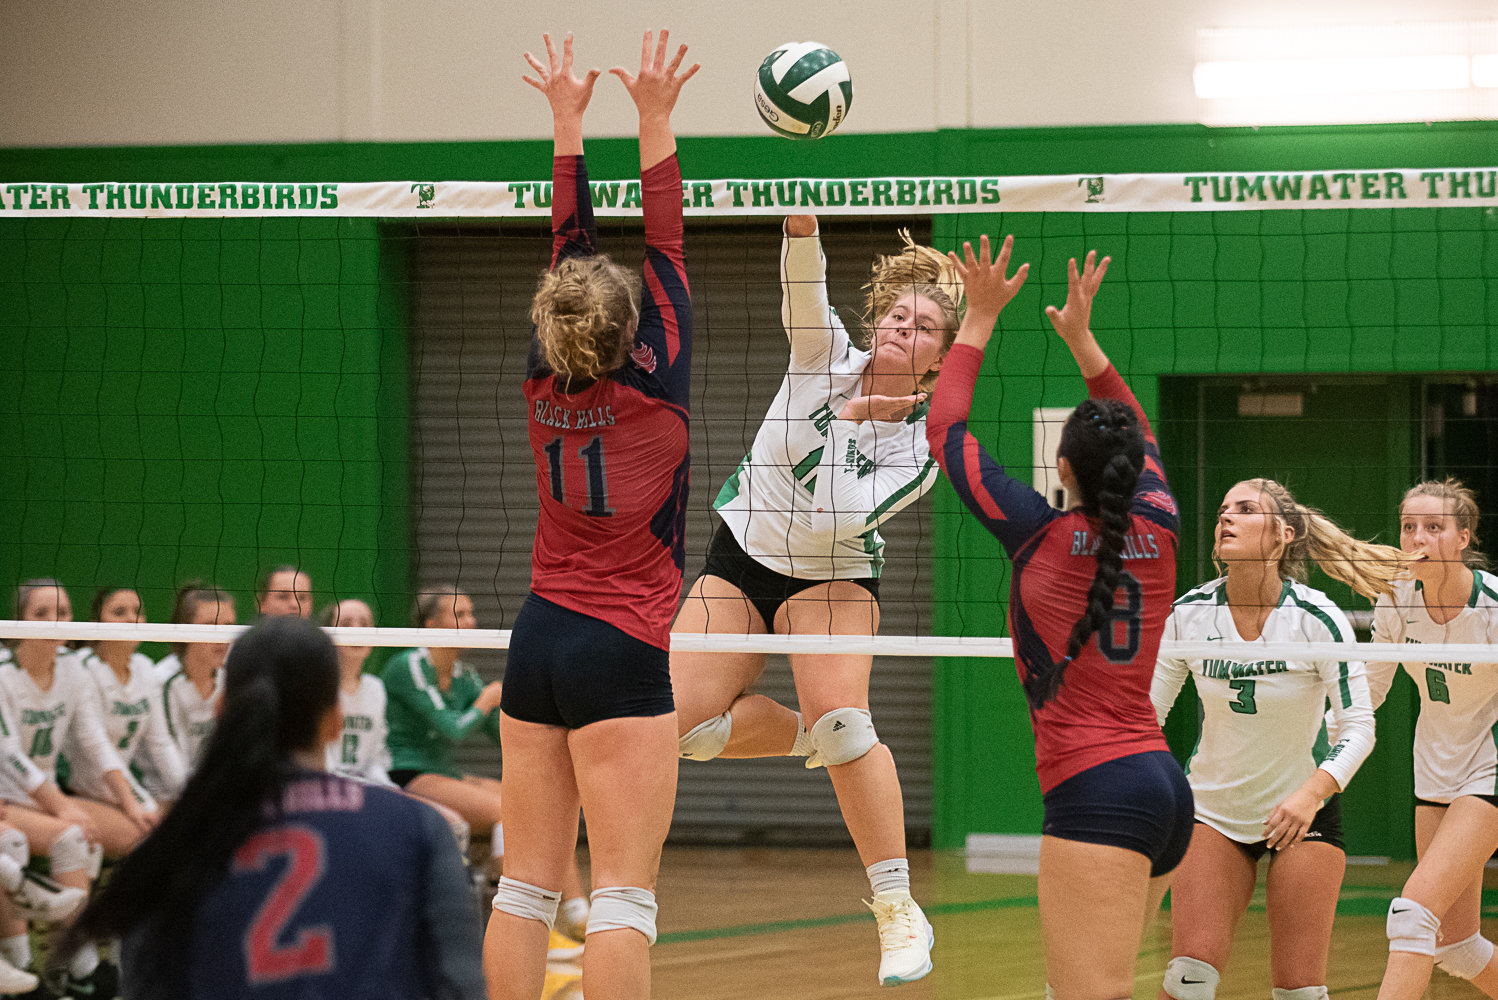 Maddie Hurley gets a spike past the Black Hills block during Tumwaters' win over the Wolves on Oct. 11.